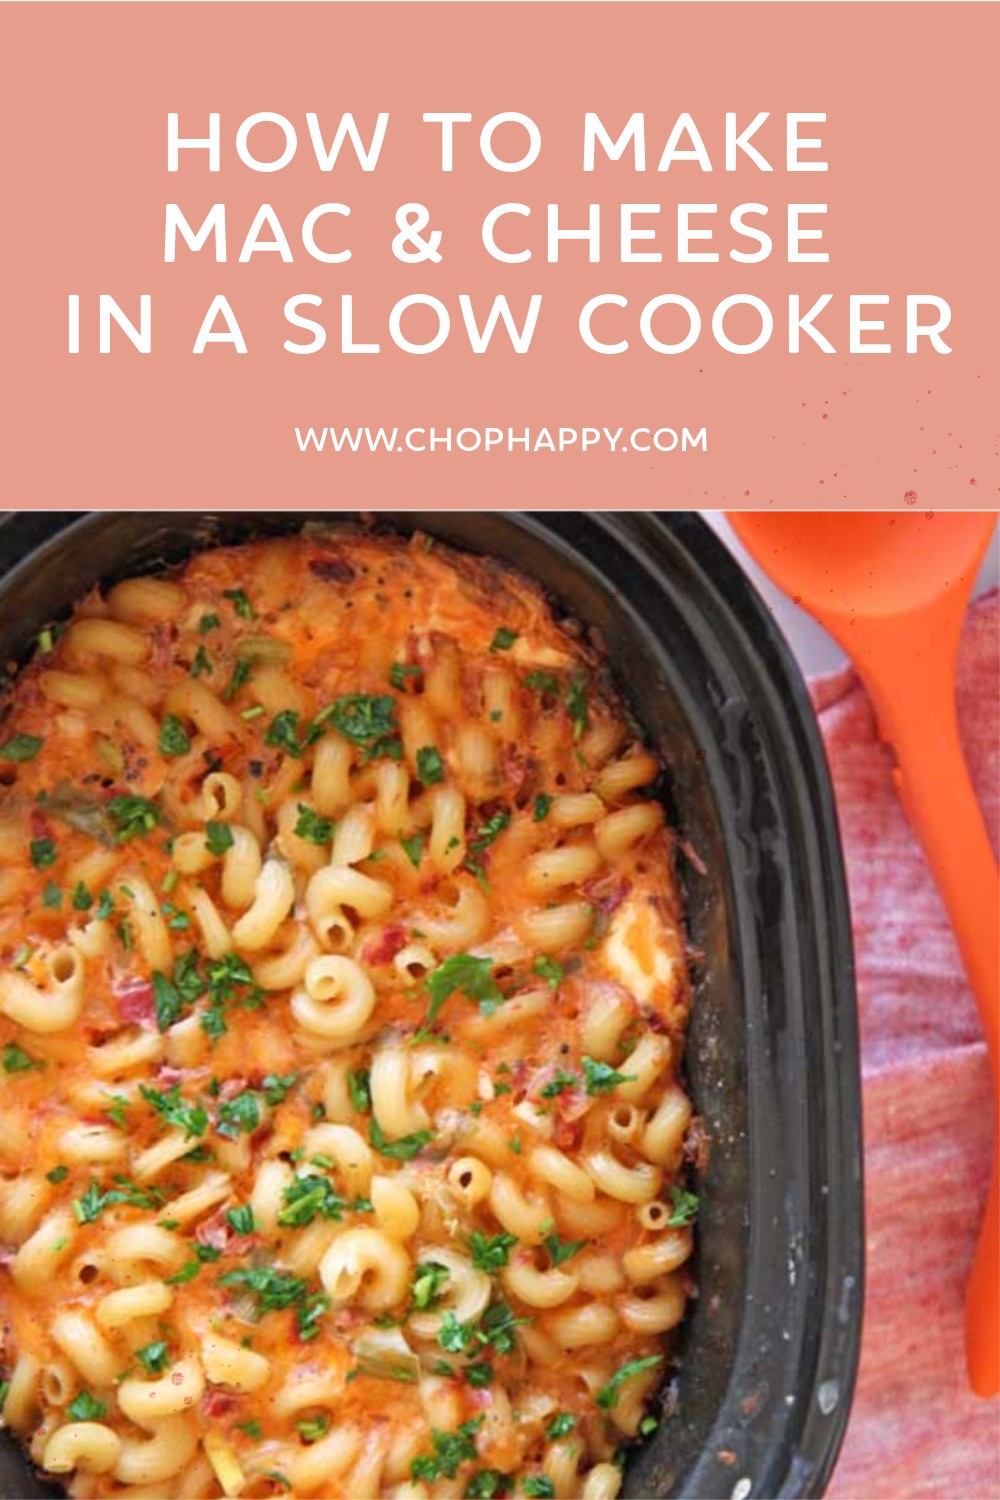 How to Make Mac and Cheese in a Slow Cooker